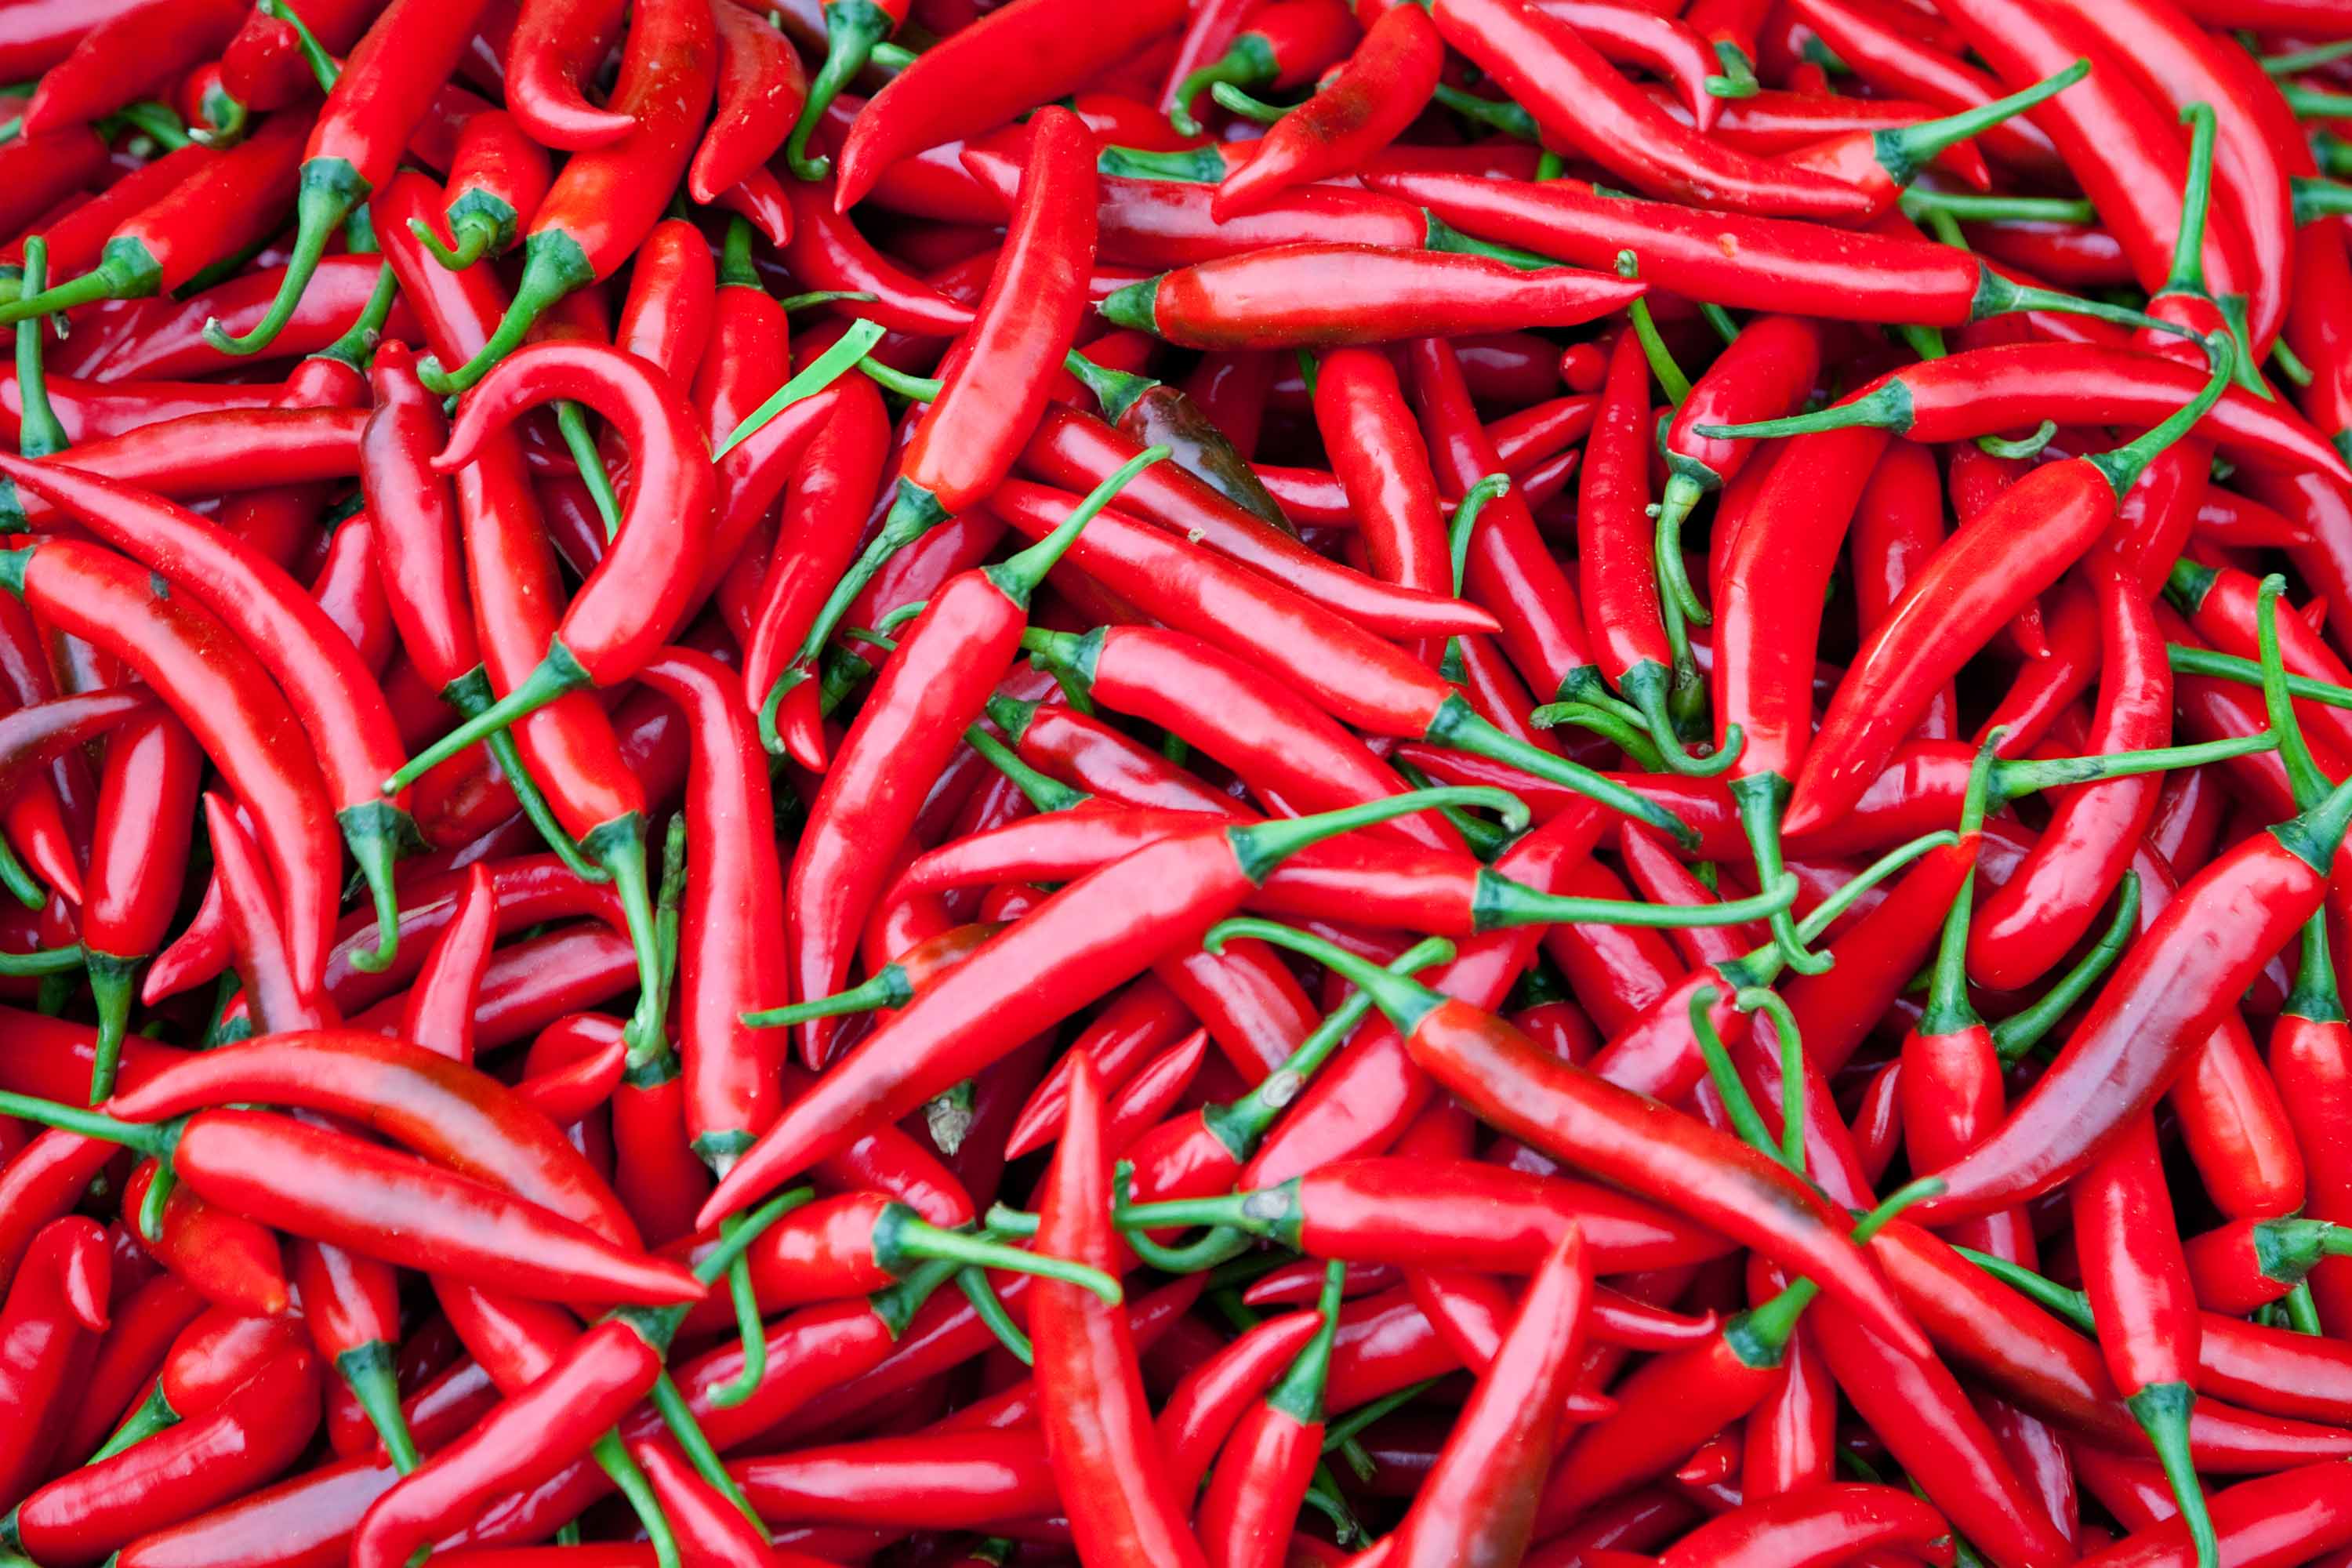 Eating chilies cuts risk of death from heart attack and stroke